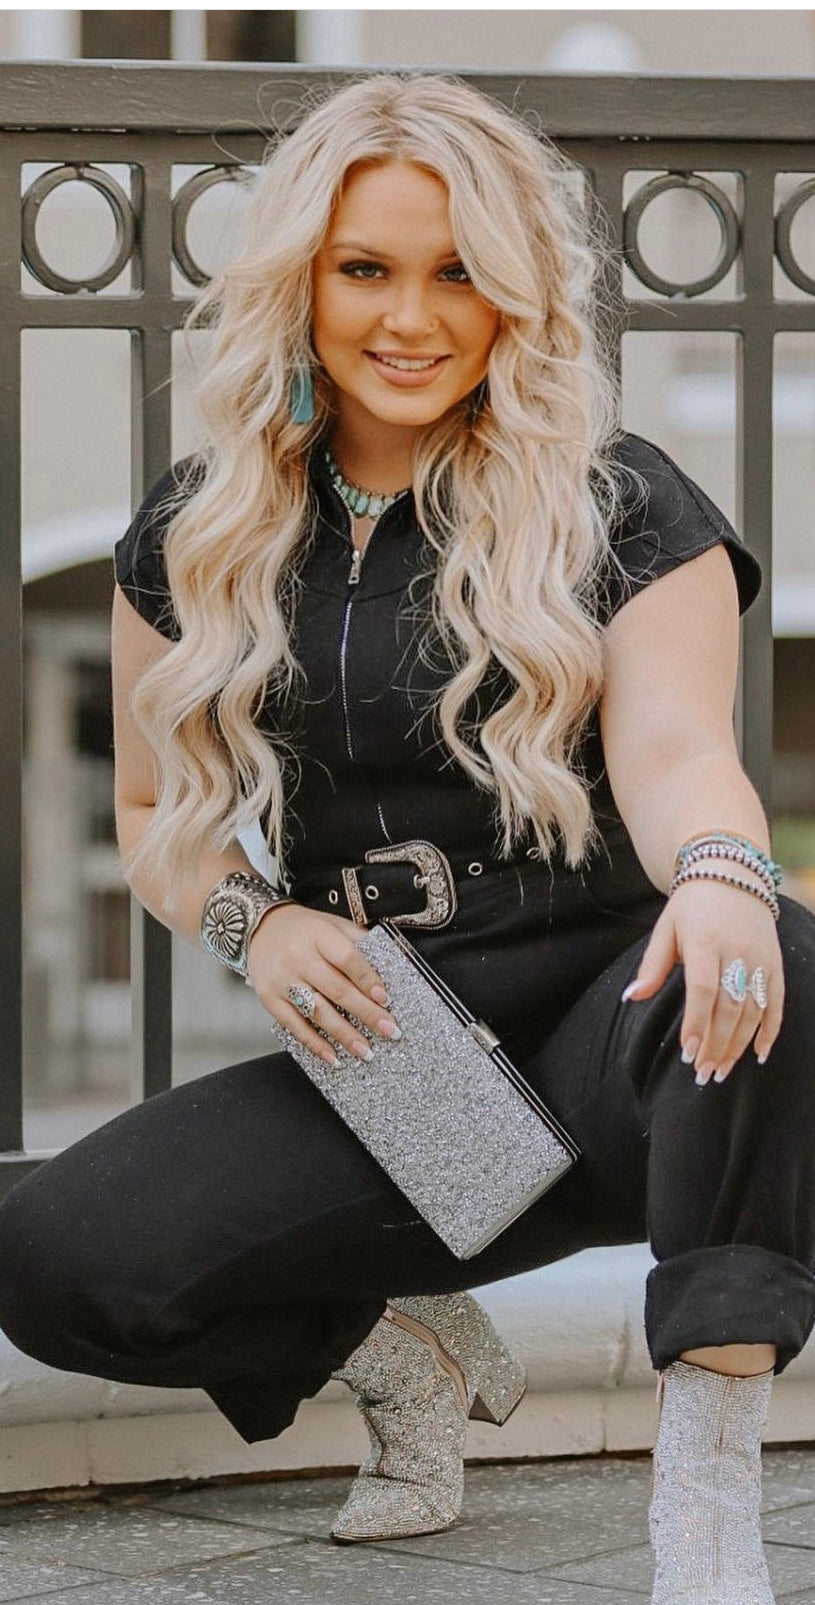 
                  
                    A person with long blonde hair is wearing a black outfit, sterling silver boots, and a glittery clutch. Adorned with a Handcrafted Silver Concho Cuff, they are posing in front of a railing, smiling at the camera.
                  
                